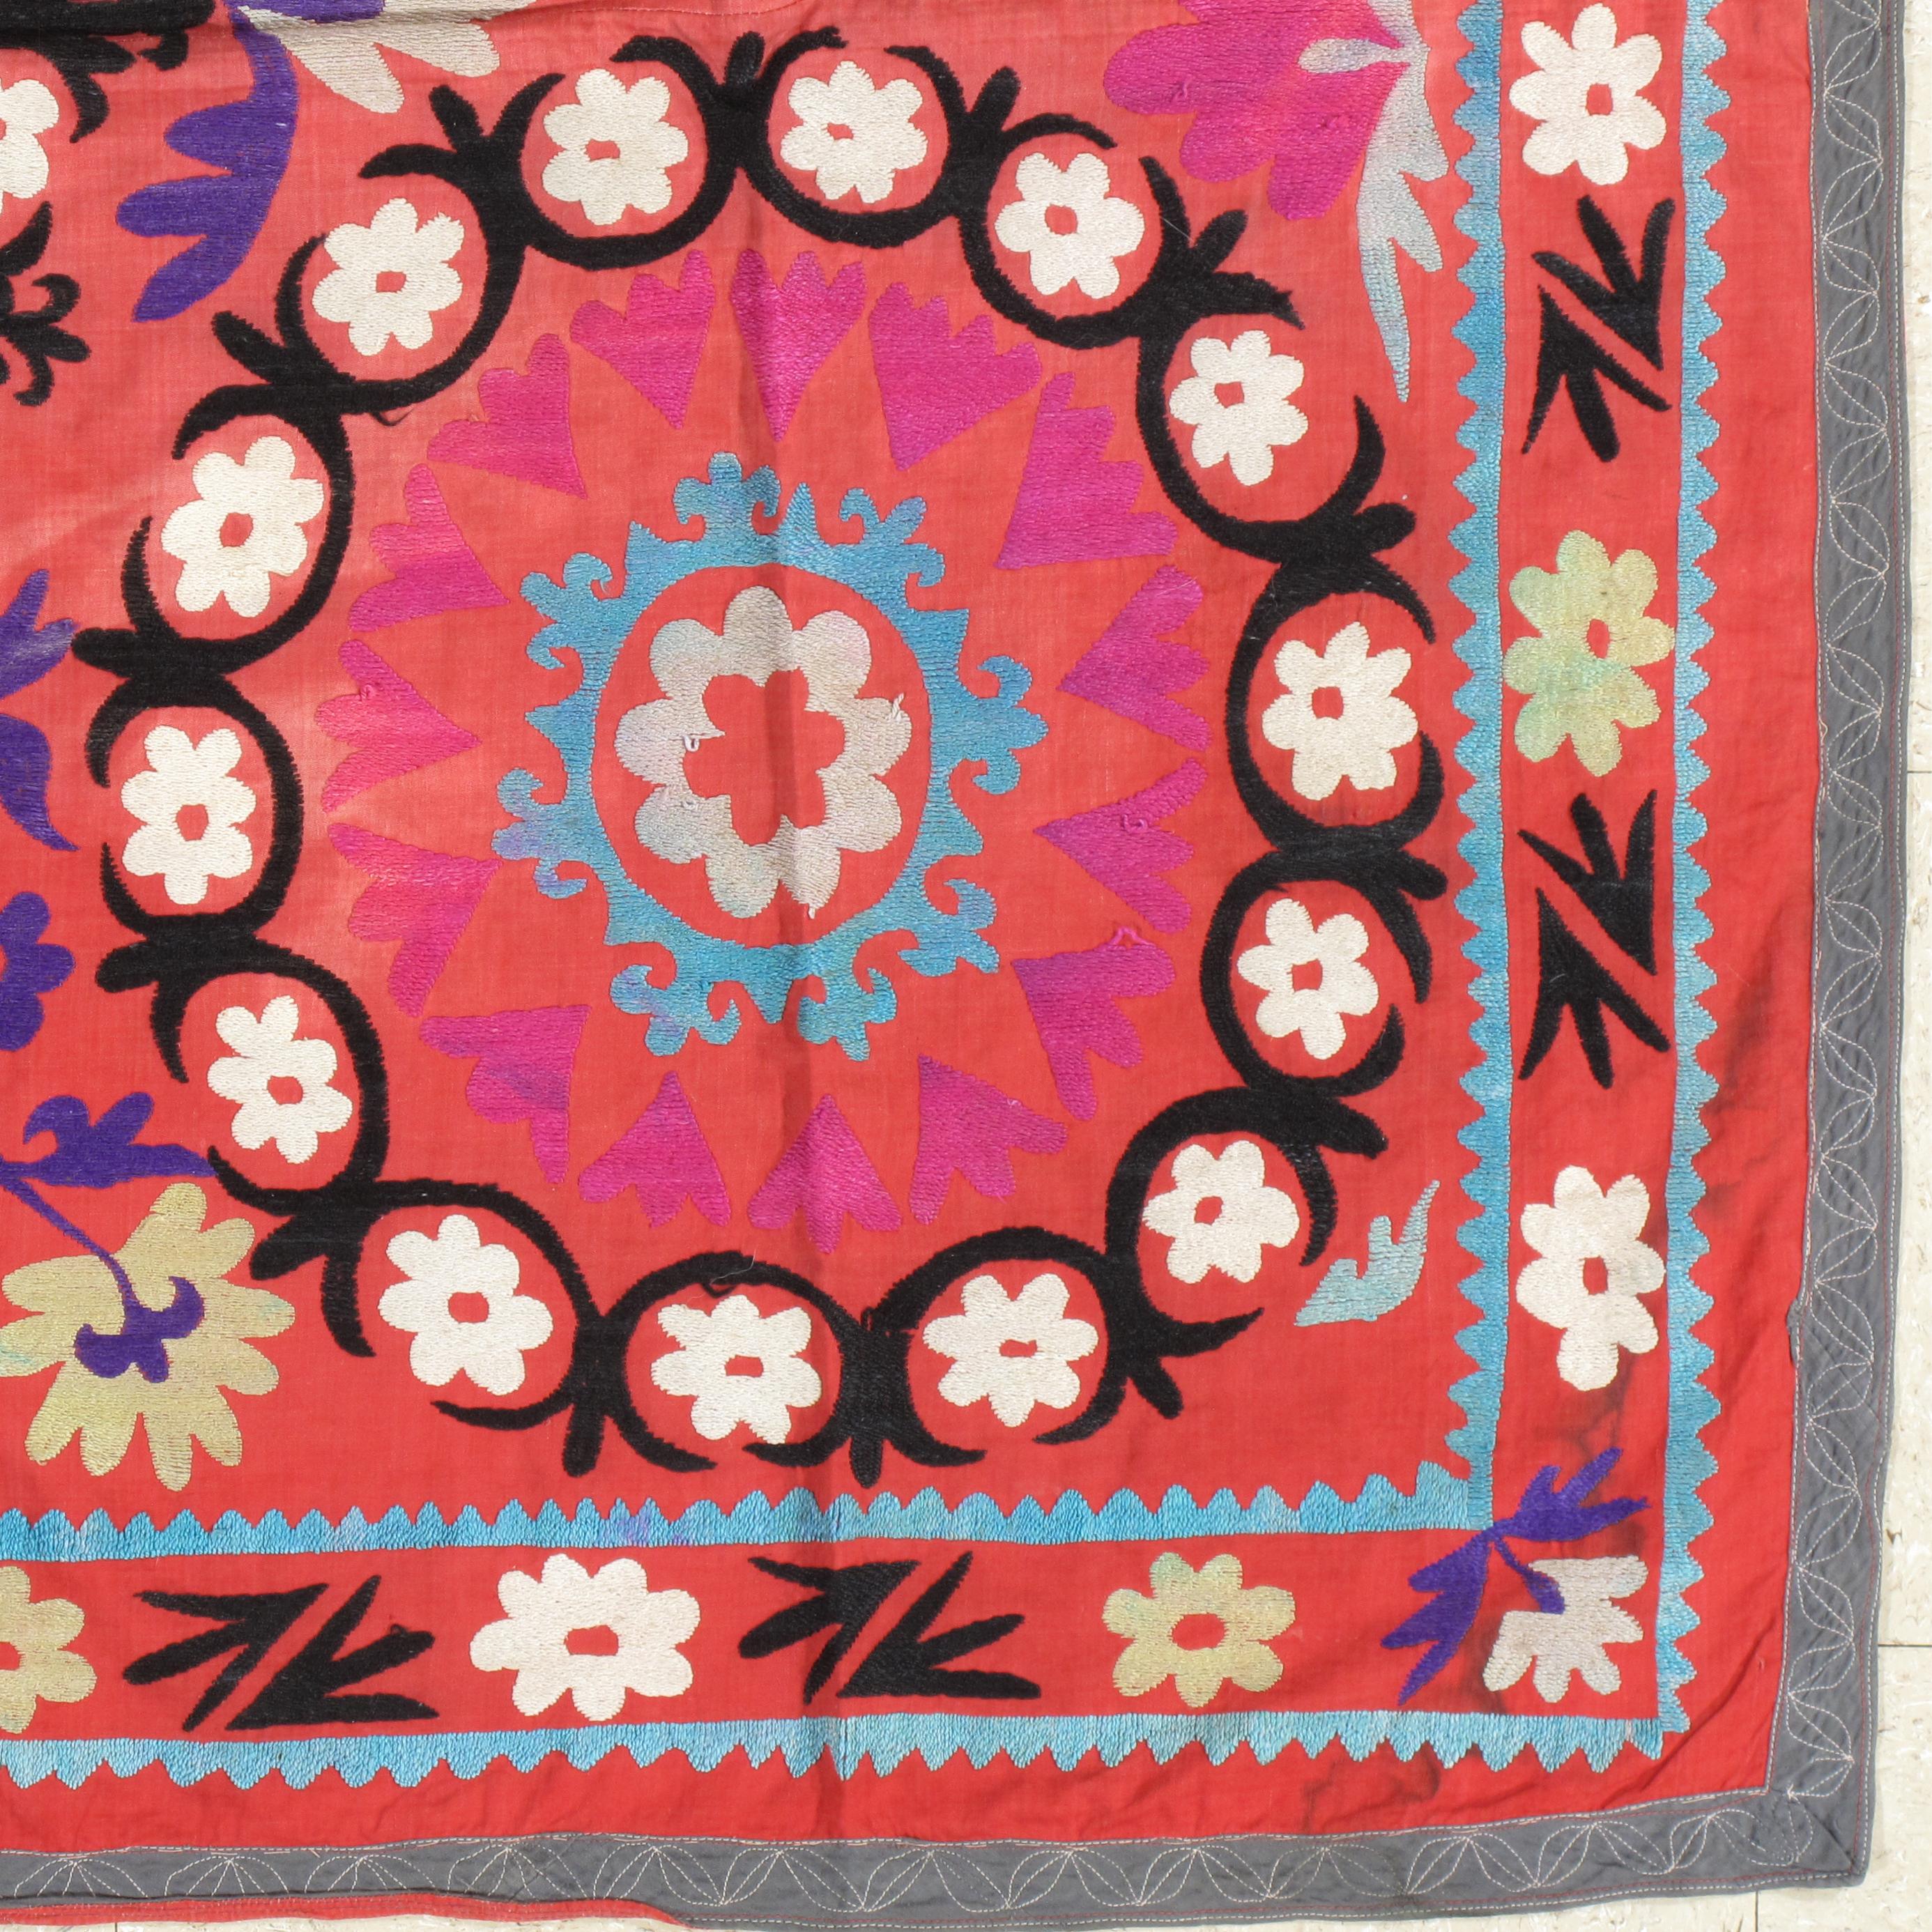 Finely woven cotton-ground Vintage Suzani with hand-embroidery. Fine floral design. This Suzani embroidery has the most noticeable, soporific color pallet. Very fine, 20th century Suzani textile. With vibrant pink silk highlights. 

Measures: 4'6